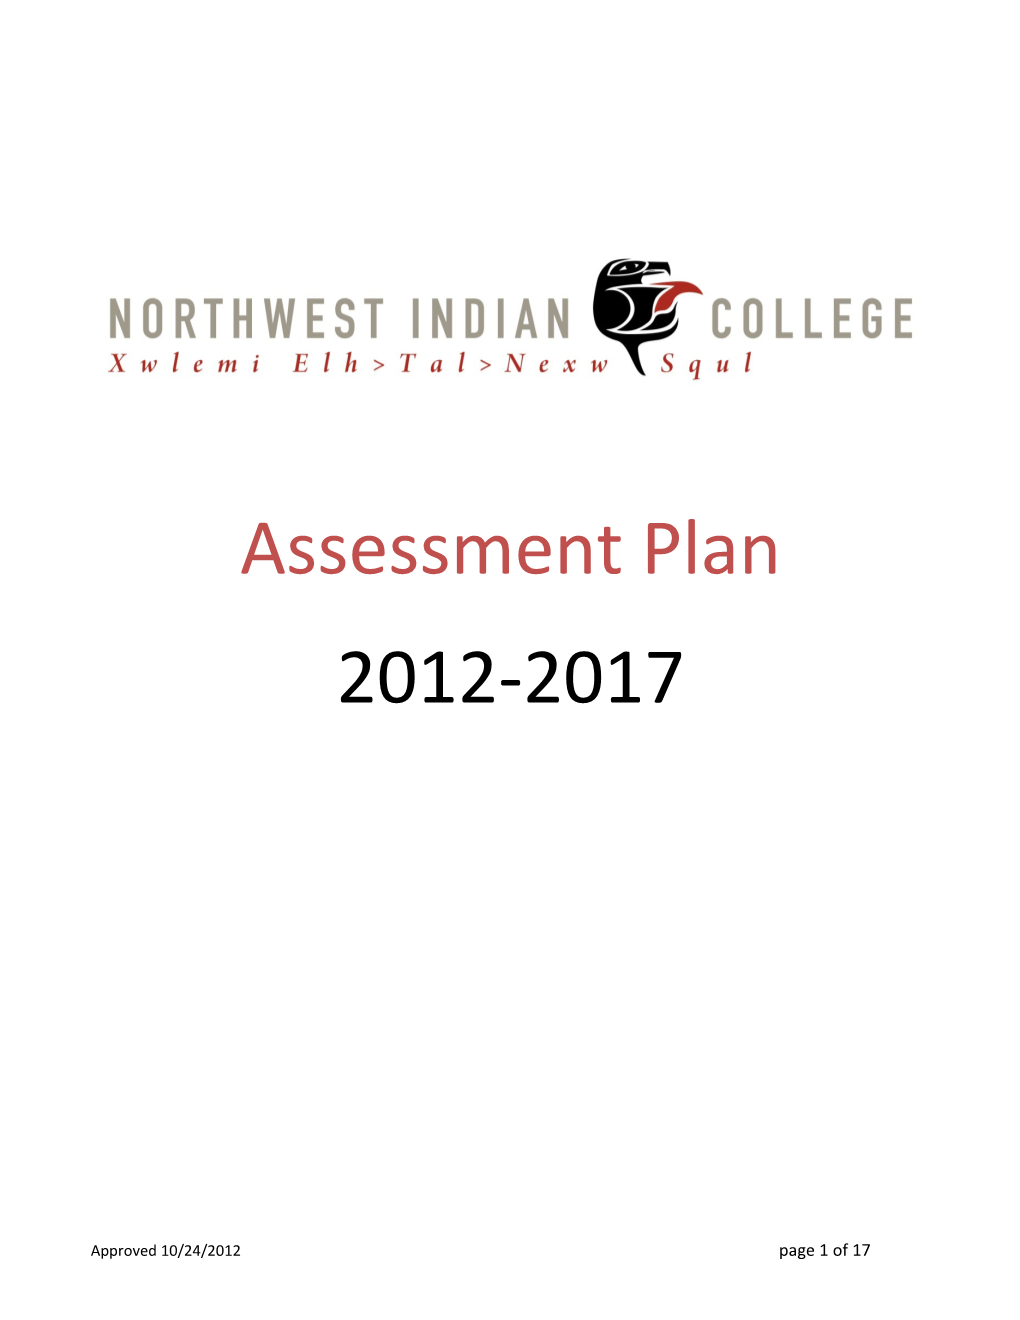 History of Assessment at Northwest Indian College